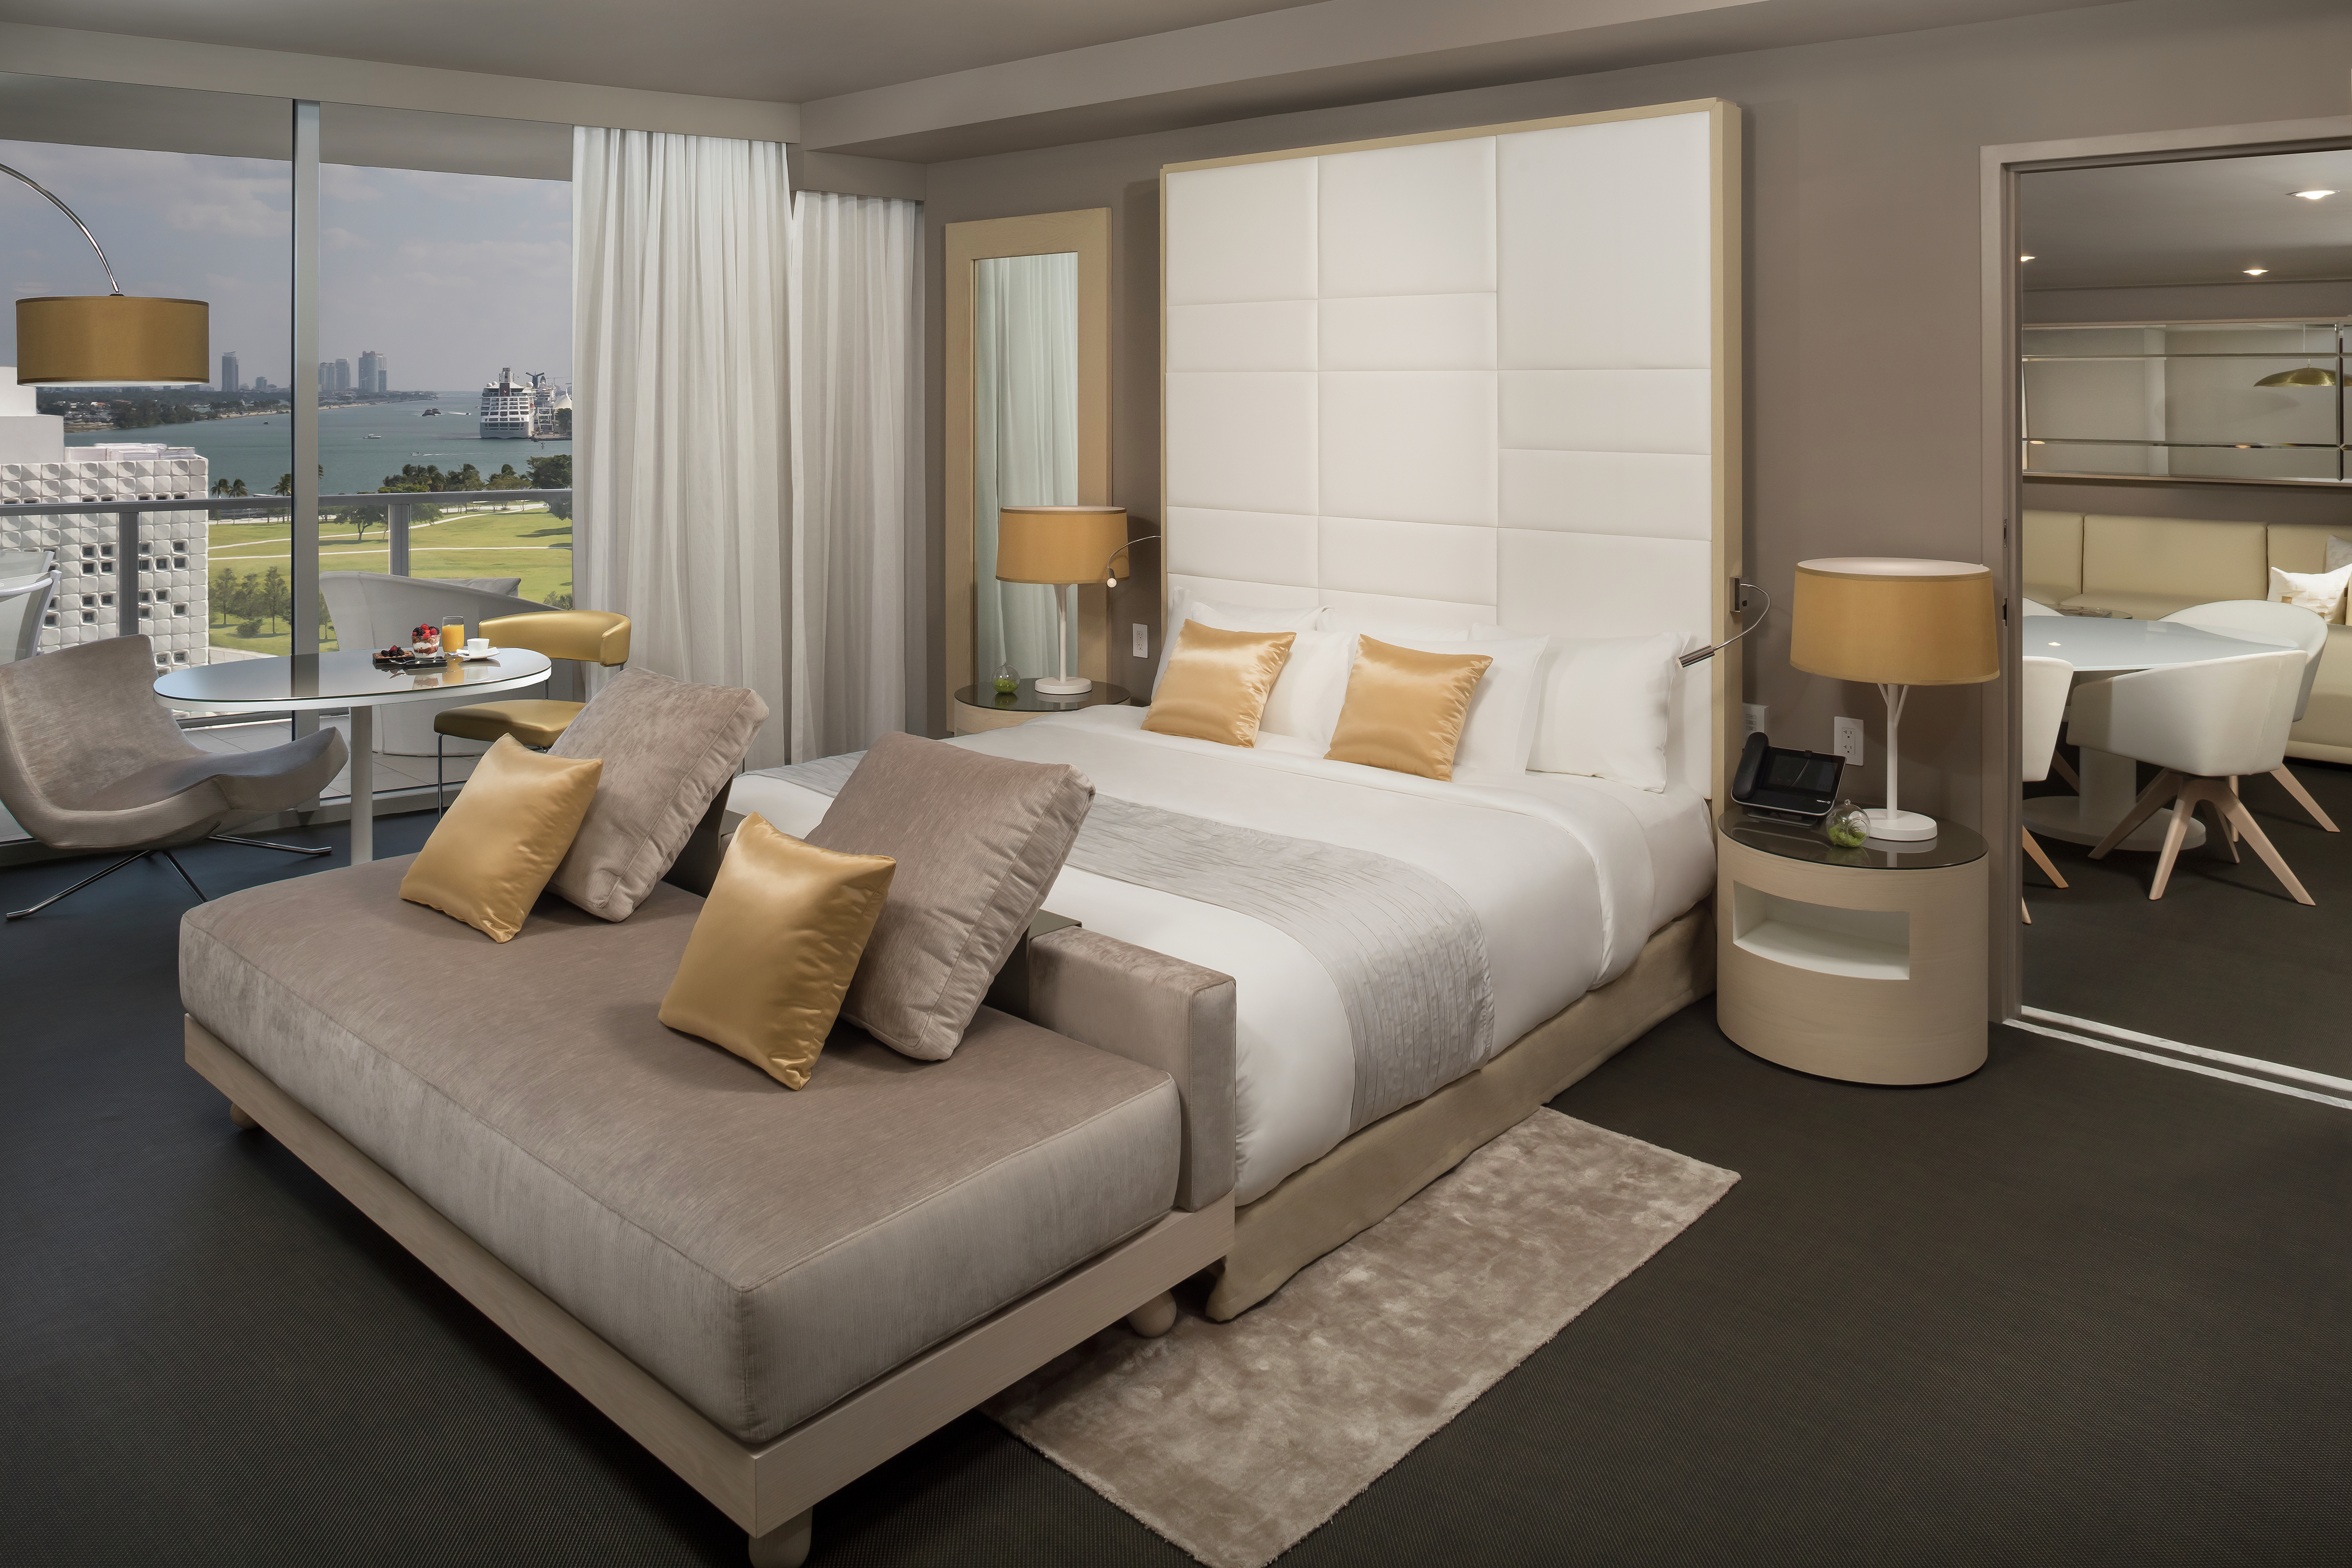 Guestroom Suite with King Bed, Outside View, Room Technology, and Lounge Area